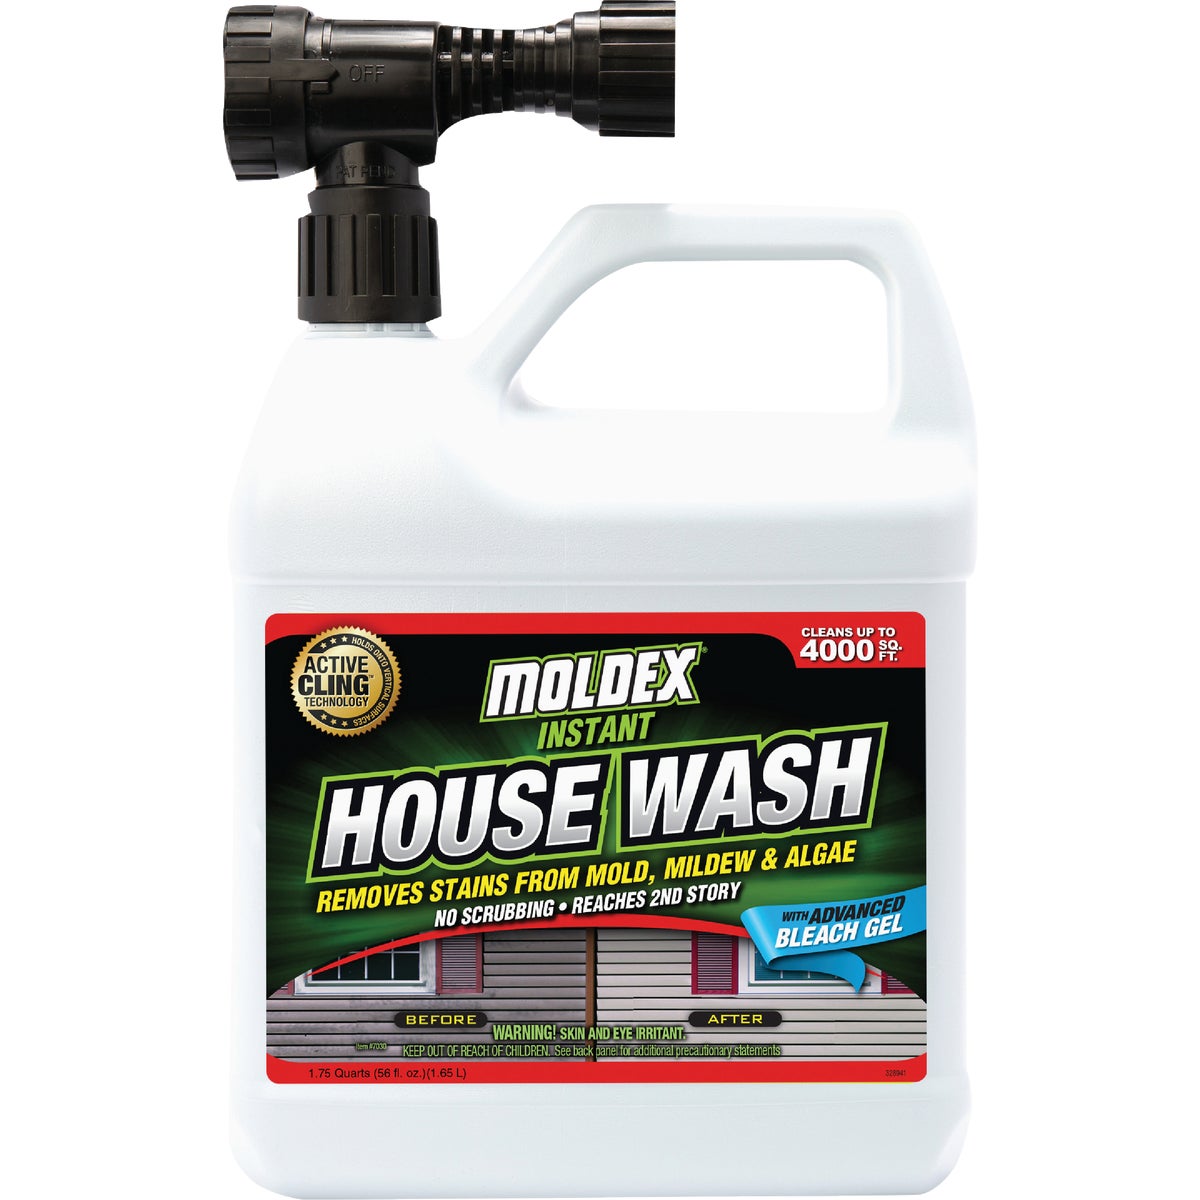 Item 771750, Instant House Wash with Bleach Gel. 56 oz ready-to-use hose end sprayer.